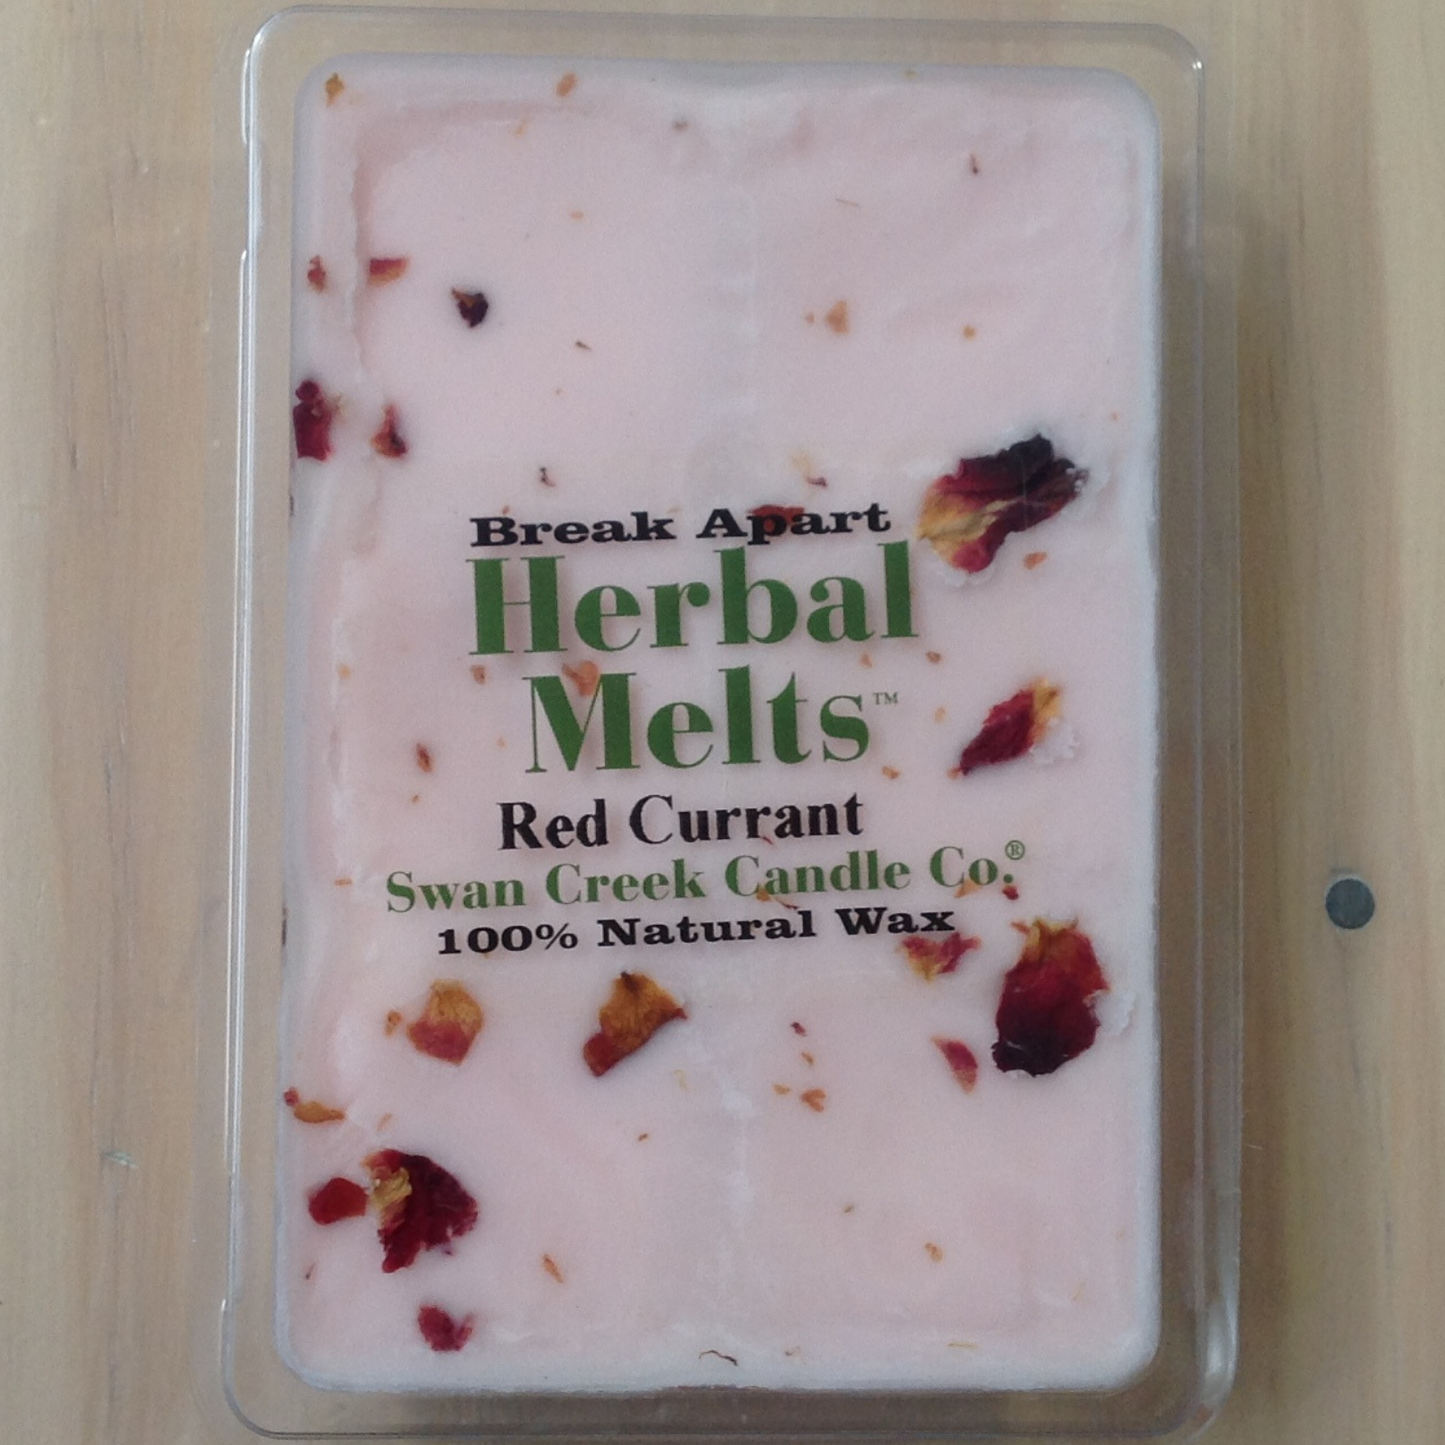 Red Currant Herbal Melts